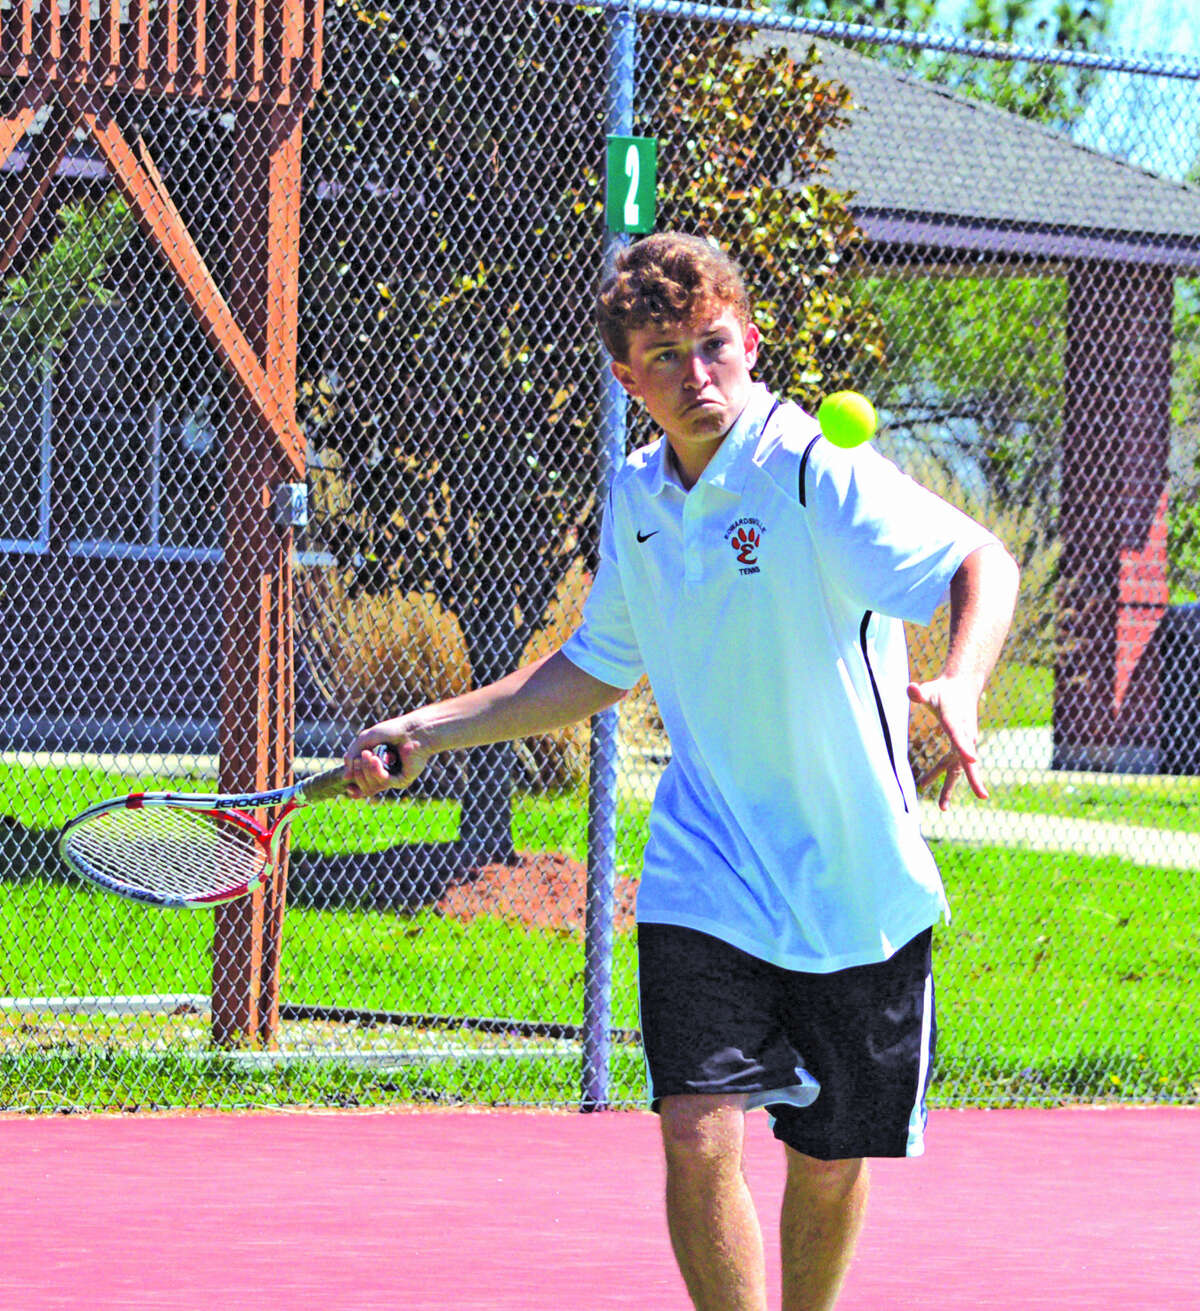 Edwardsville junior Nick Hobin makes a forehand return during his No. 1 singles match on Saturday in the Tiger Duals at the EHS Tennis Center